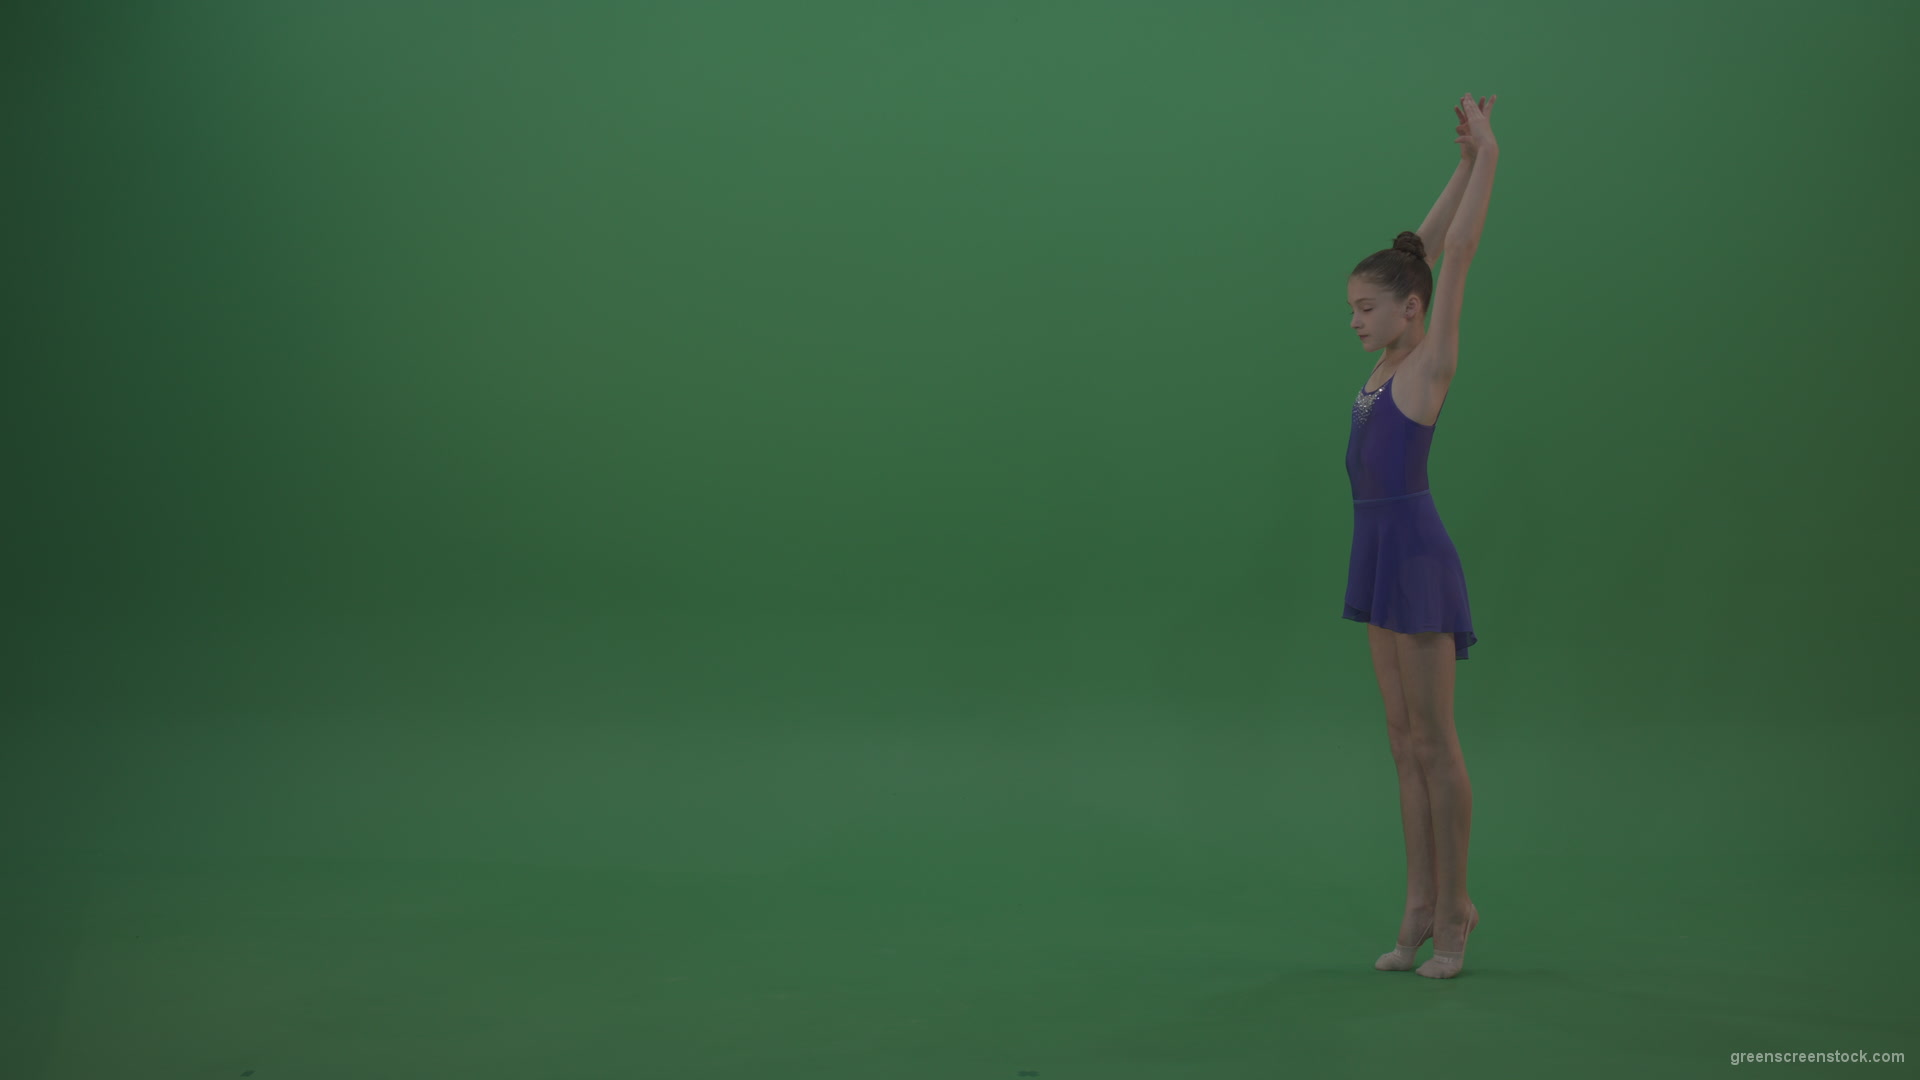 Young_Gymnast_Female_Wearing_Blue_Show_Costume_Performing_Great_Spinning_Arabesque_Moves_Showing_Awesome_Technique_On_Green_Screen_Wall_Background_002 Green Screen Stock